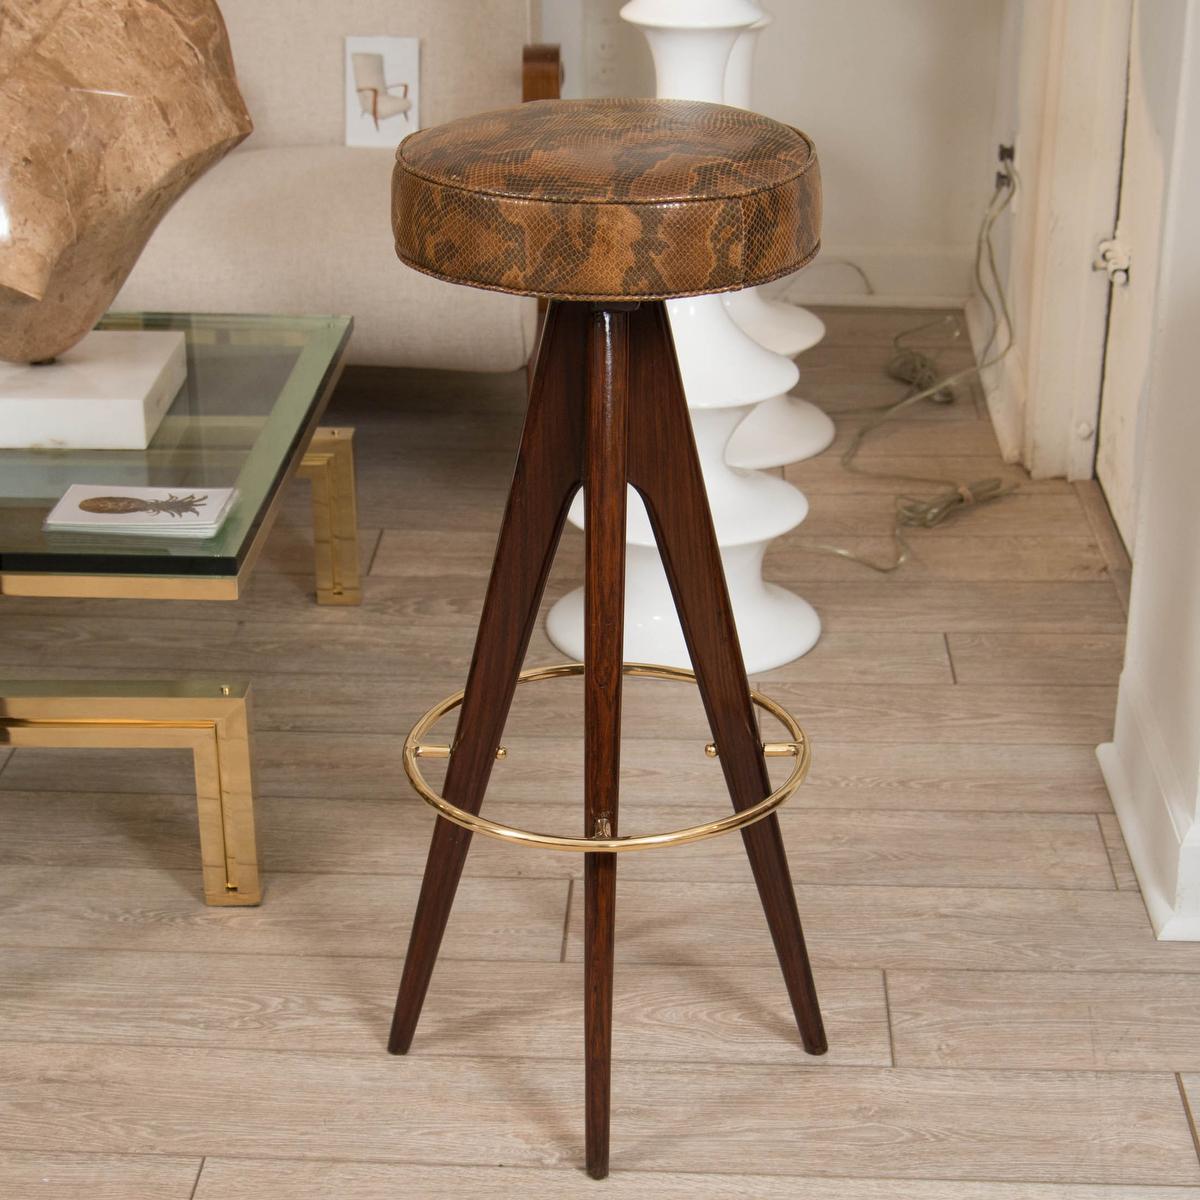 Pair of four-leg wood stools with snake skin upholstered seats and brass details.